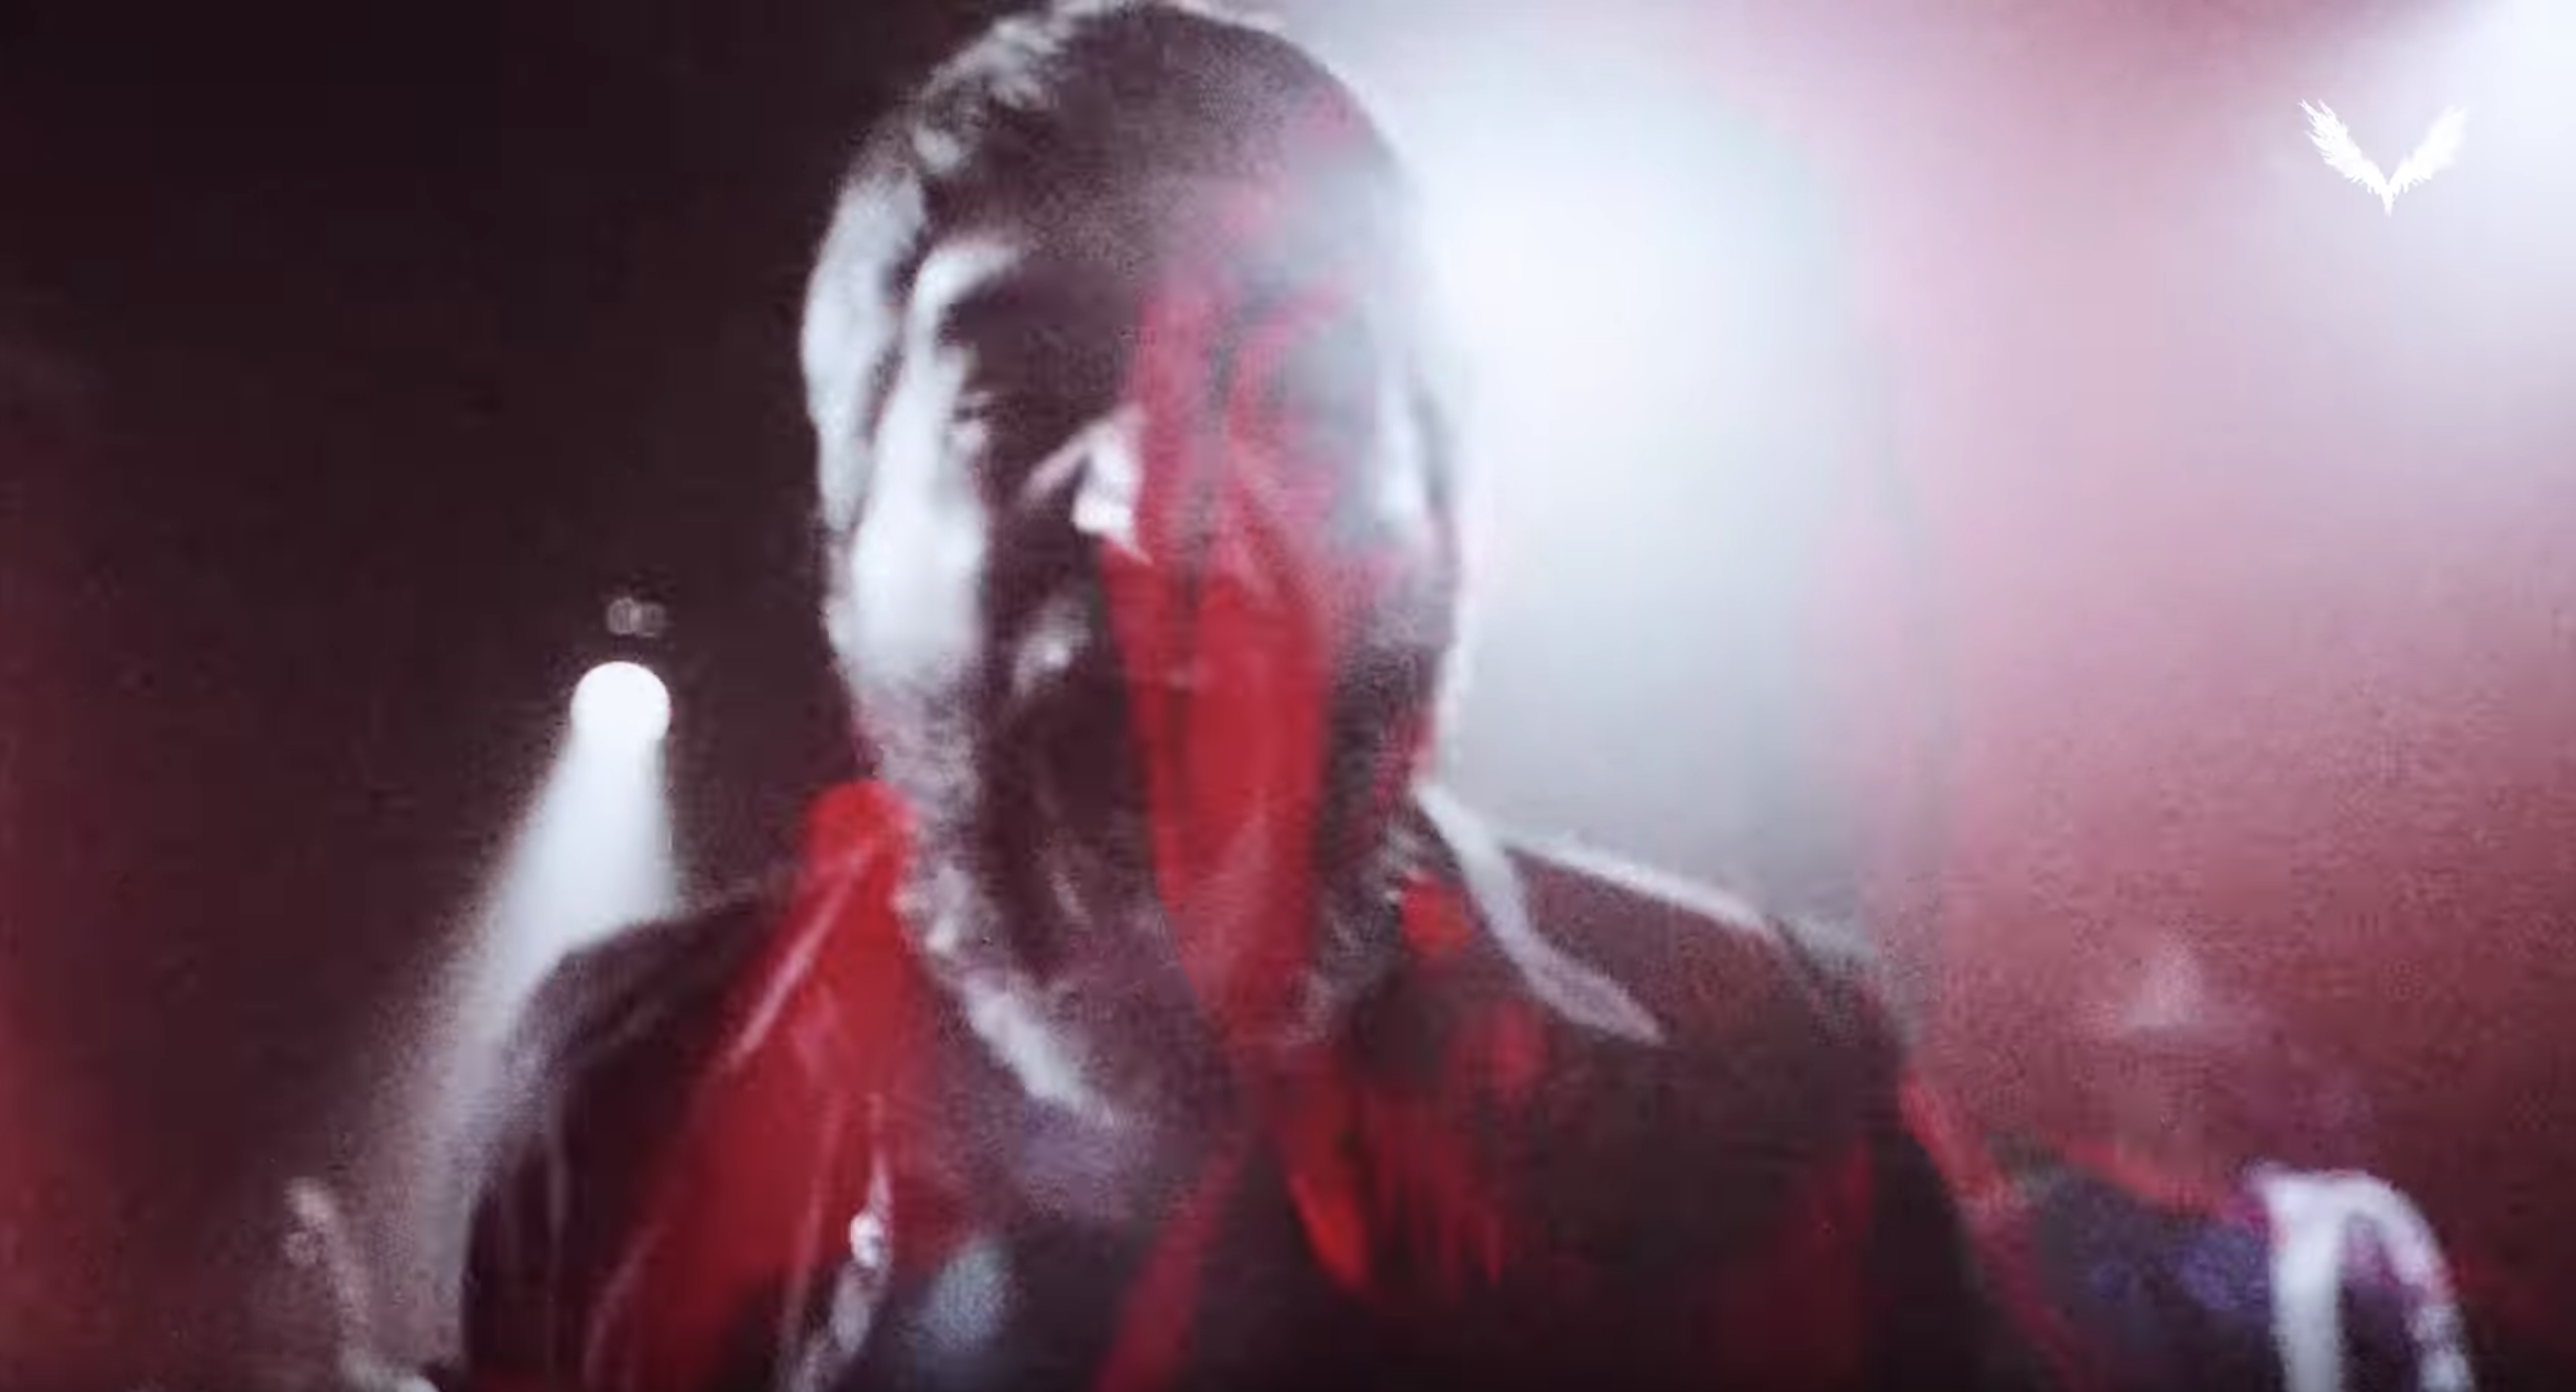 Suicide Silence singer Eddie Hermida’s vocals replaced by Michael Barr (ex-Volumes) in ‘Devil May Cry 5’ video game